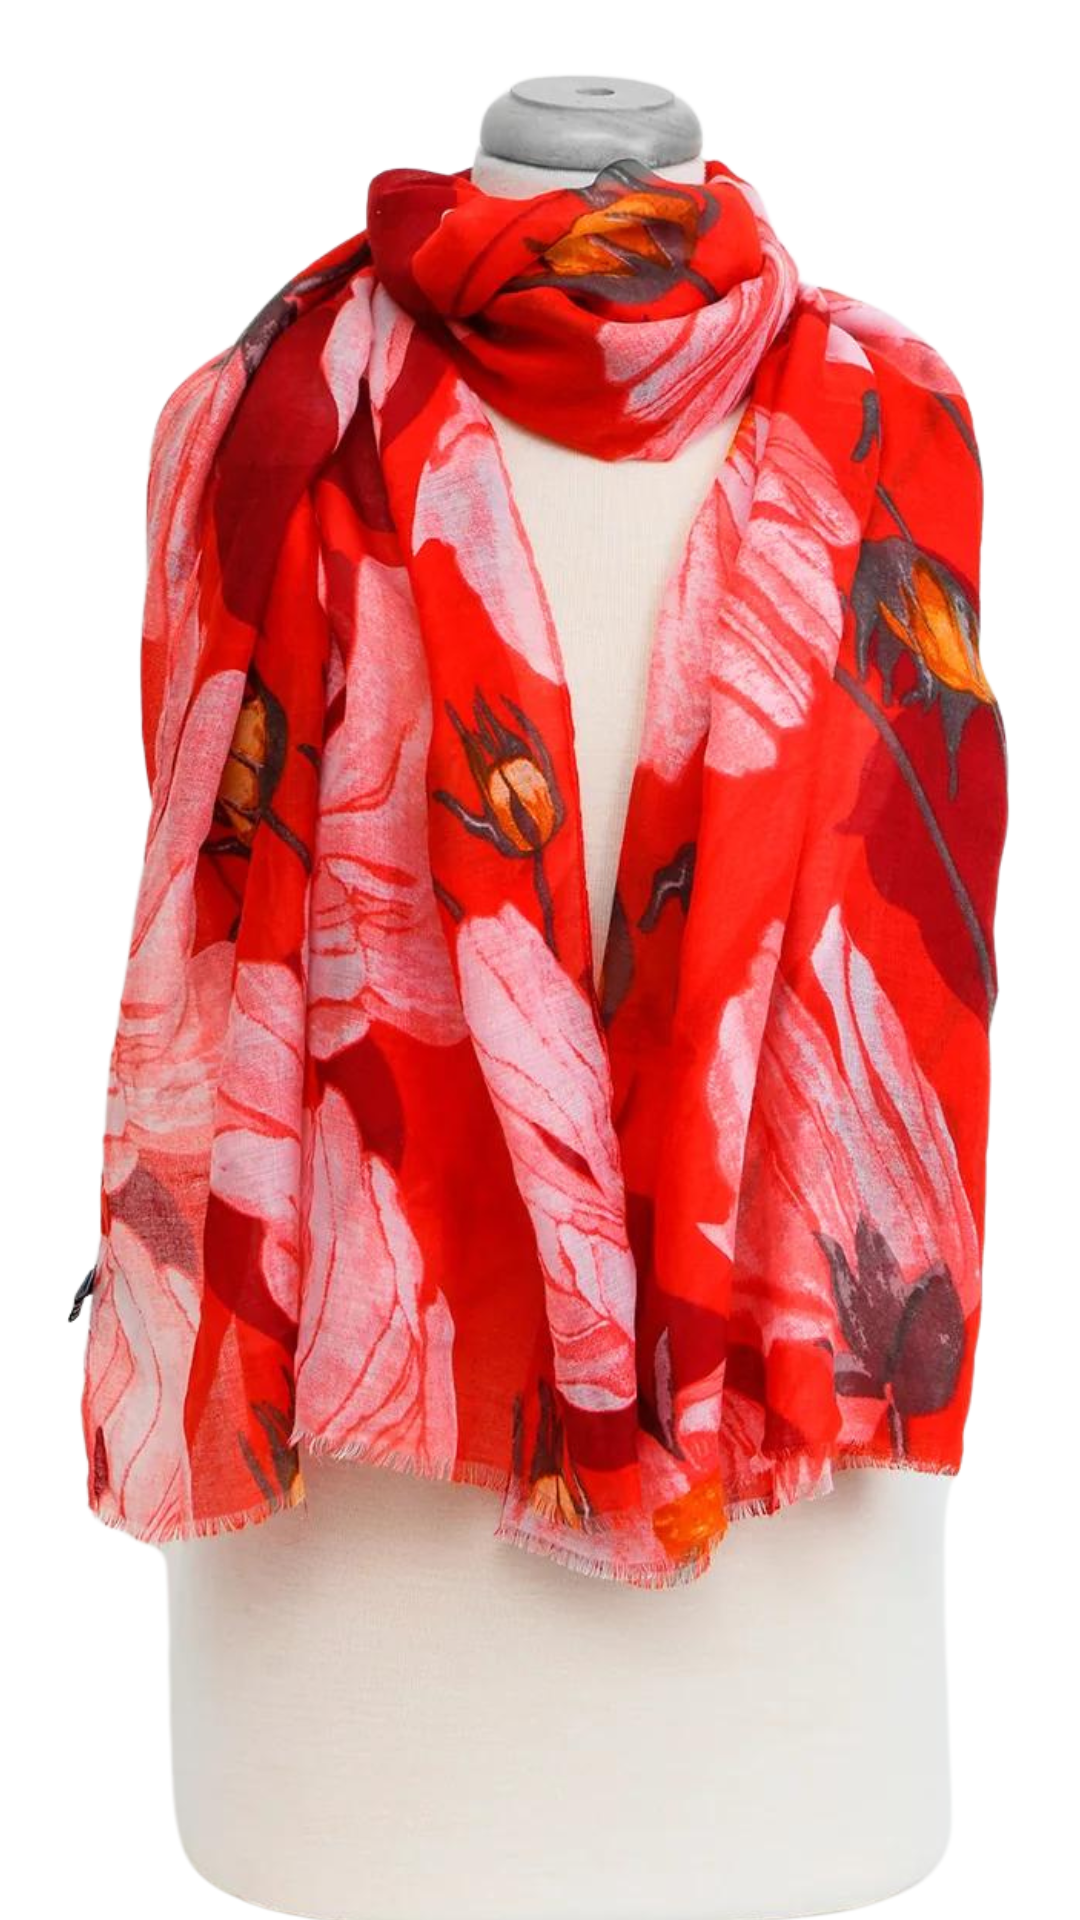 Red Floral Print Foulard Scarf. Style CARA6149-RED